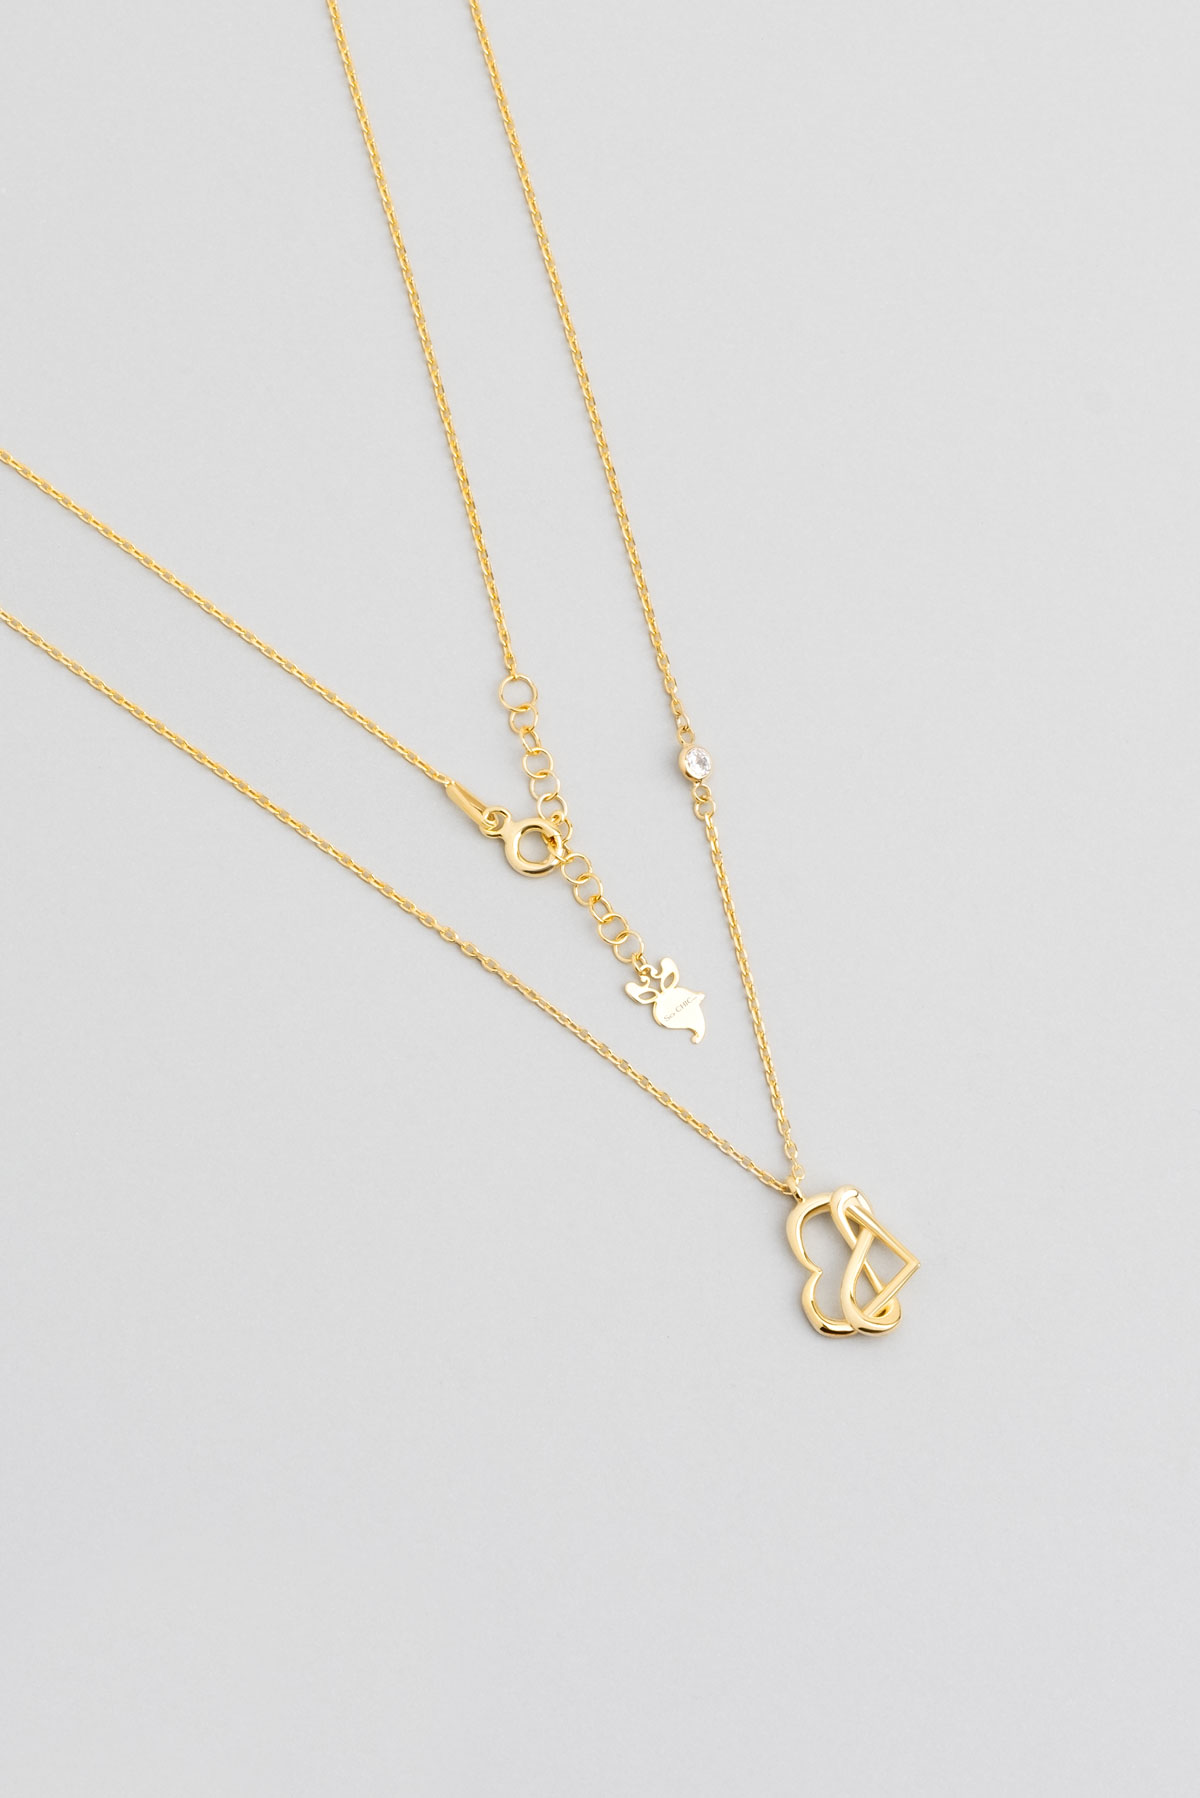 Infinite Love 18 Karat Yellow Gold Plated Silver Heart Necklace